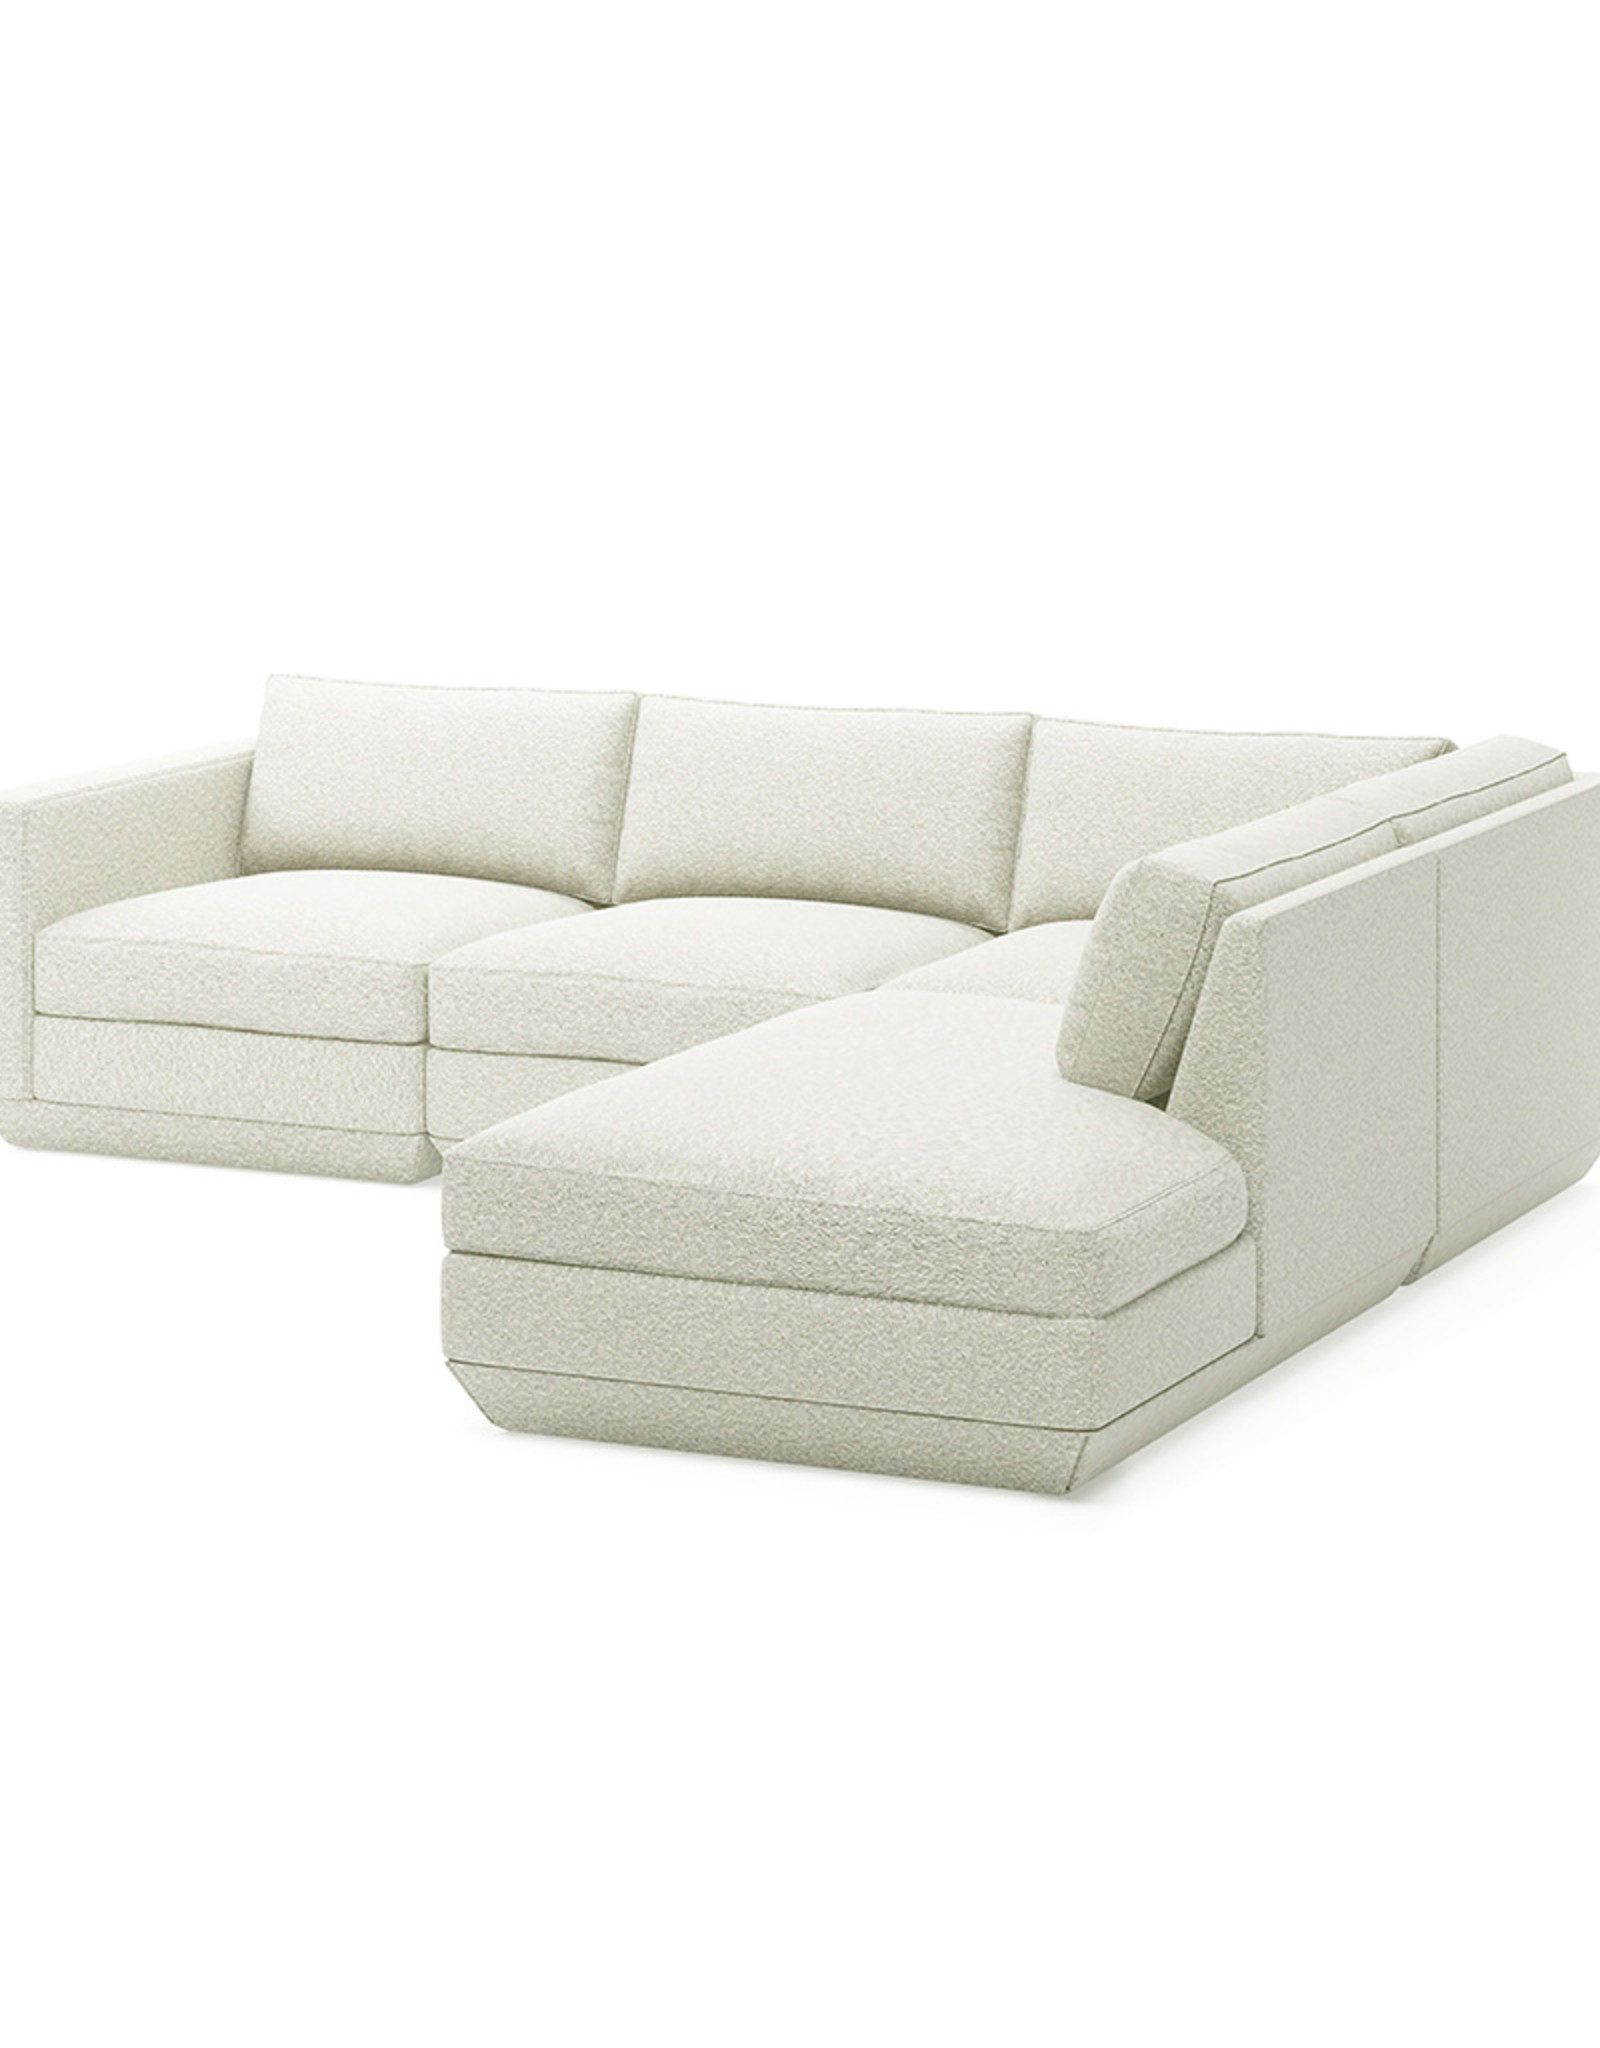 Gus* Modern Podium 4-PC Lounge Sectional A, Right-facing